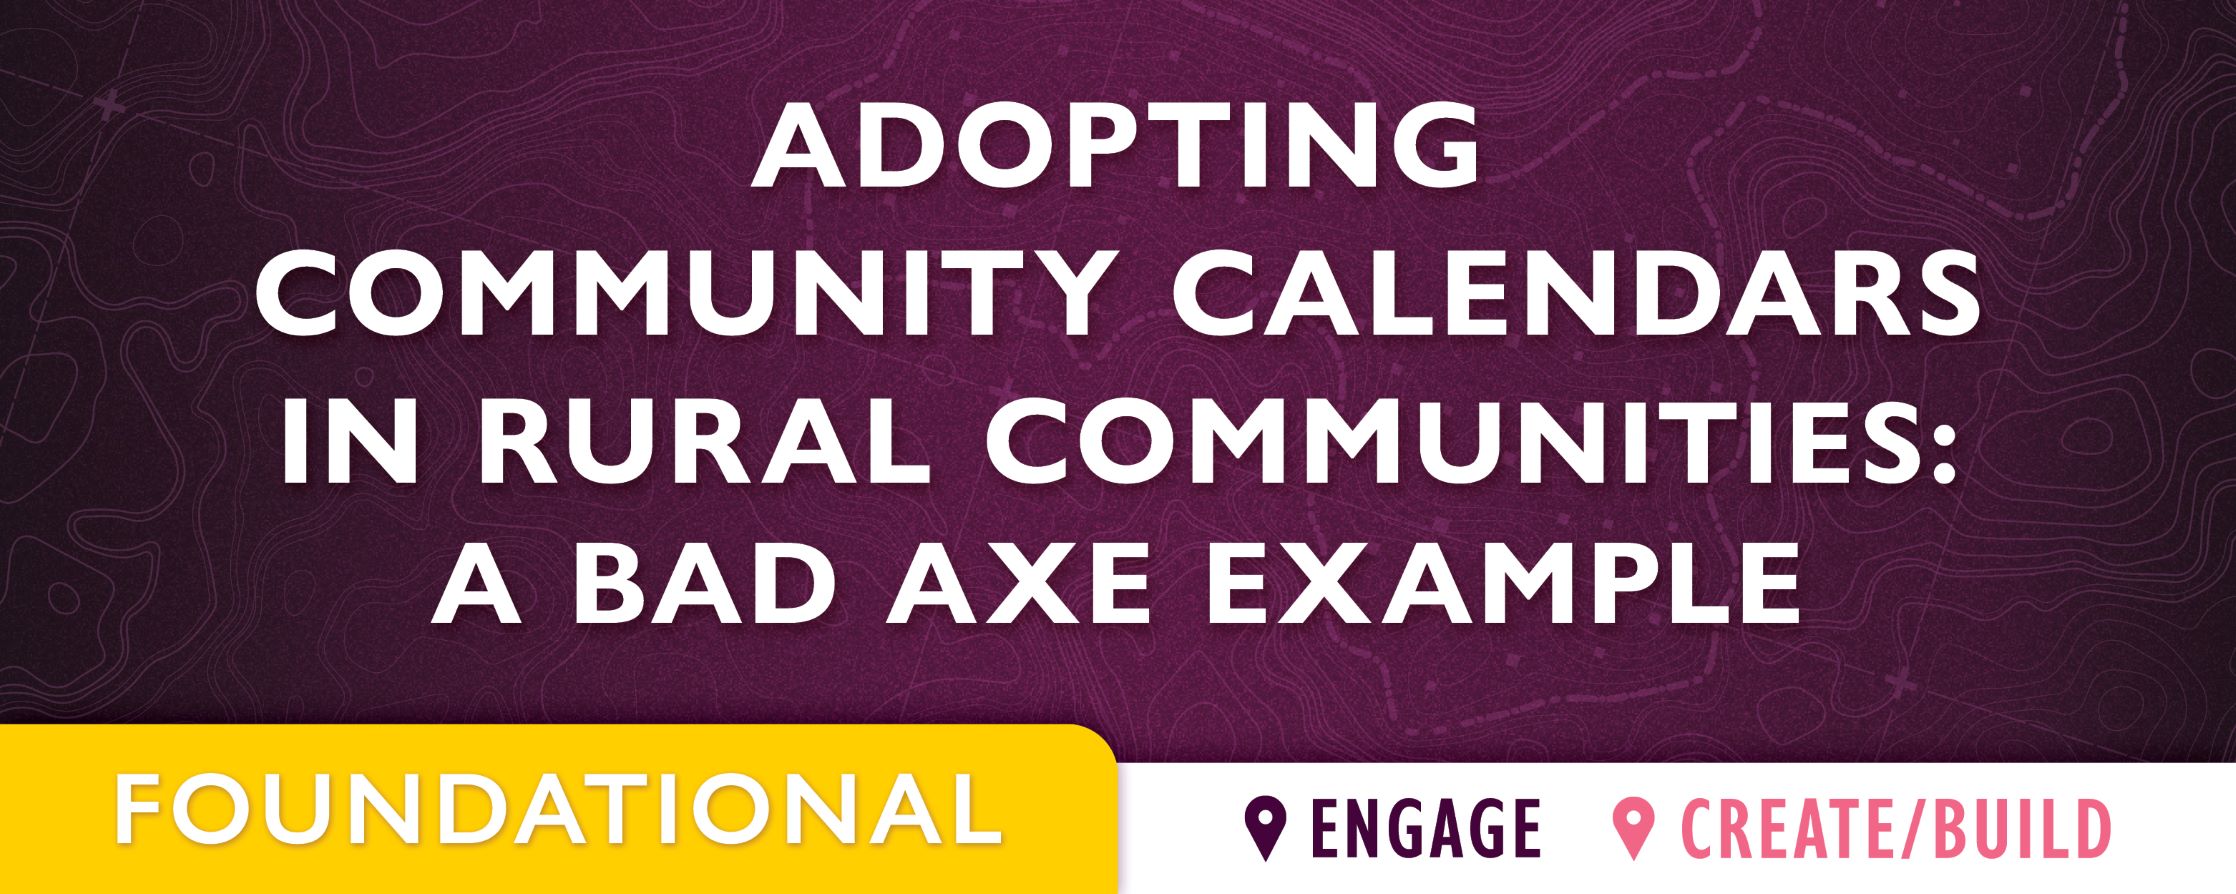 purple background with text: Adopting Community Calendars in Rural Communities: A Bad Axe Example  